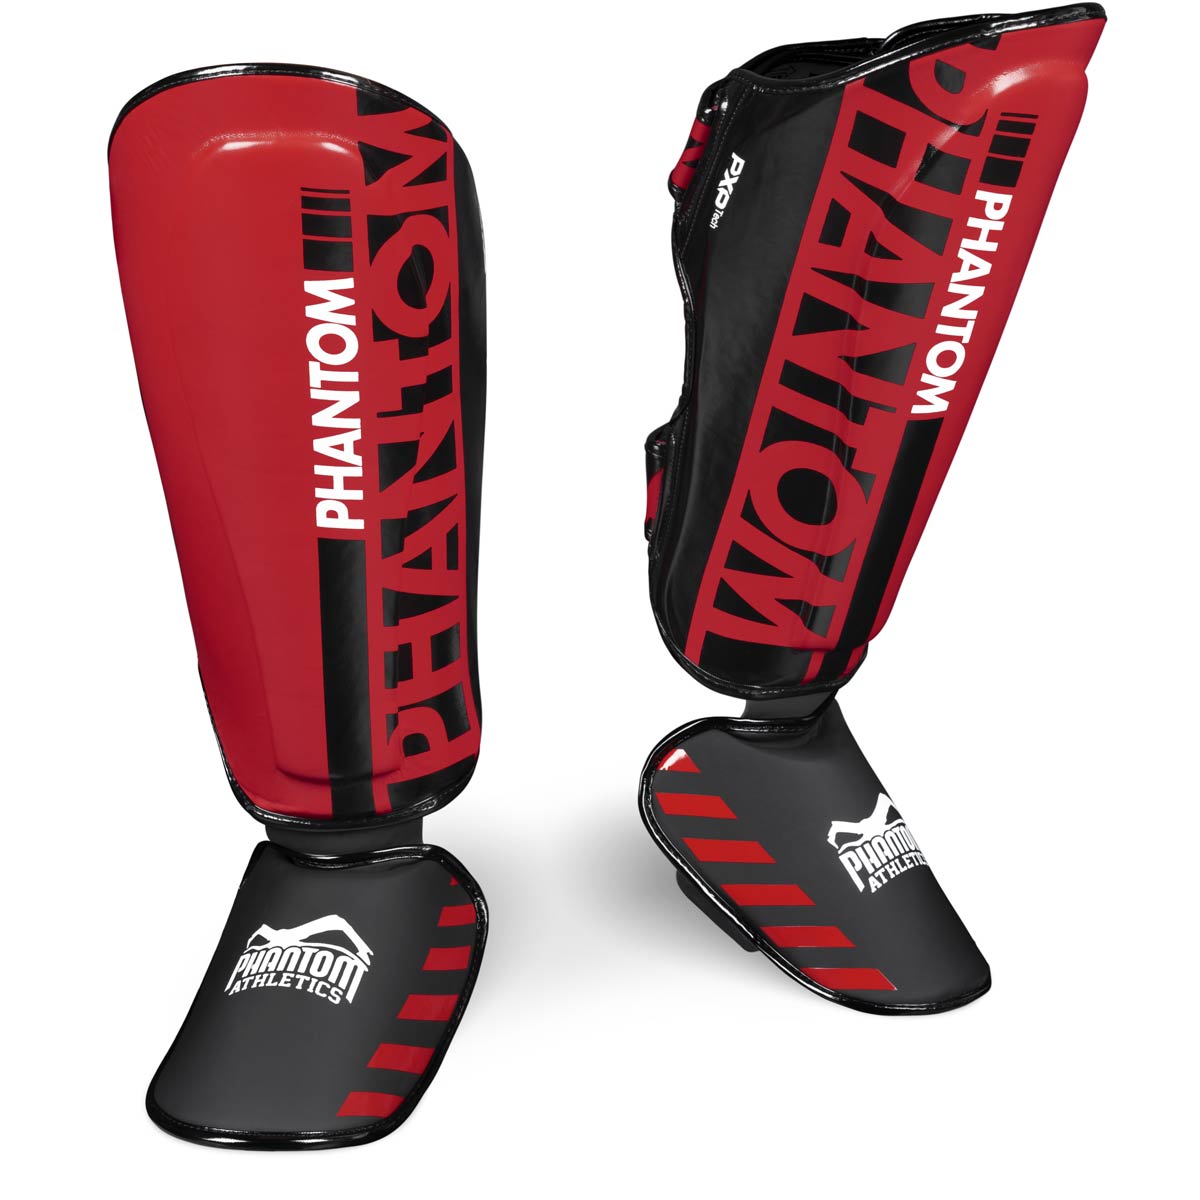 Phantom martial arts shin guards for kickboxing, MMA and Muay Thai. Ultimate protection in training and competition.